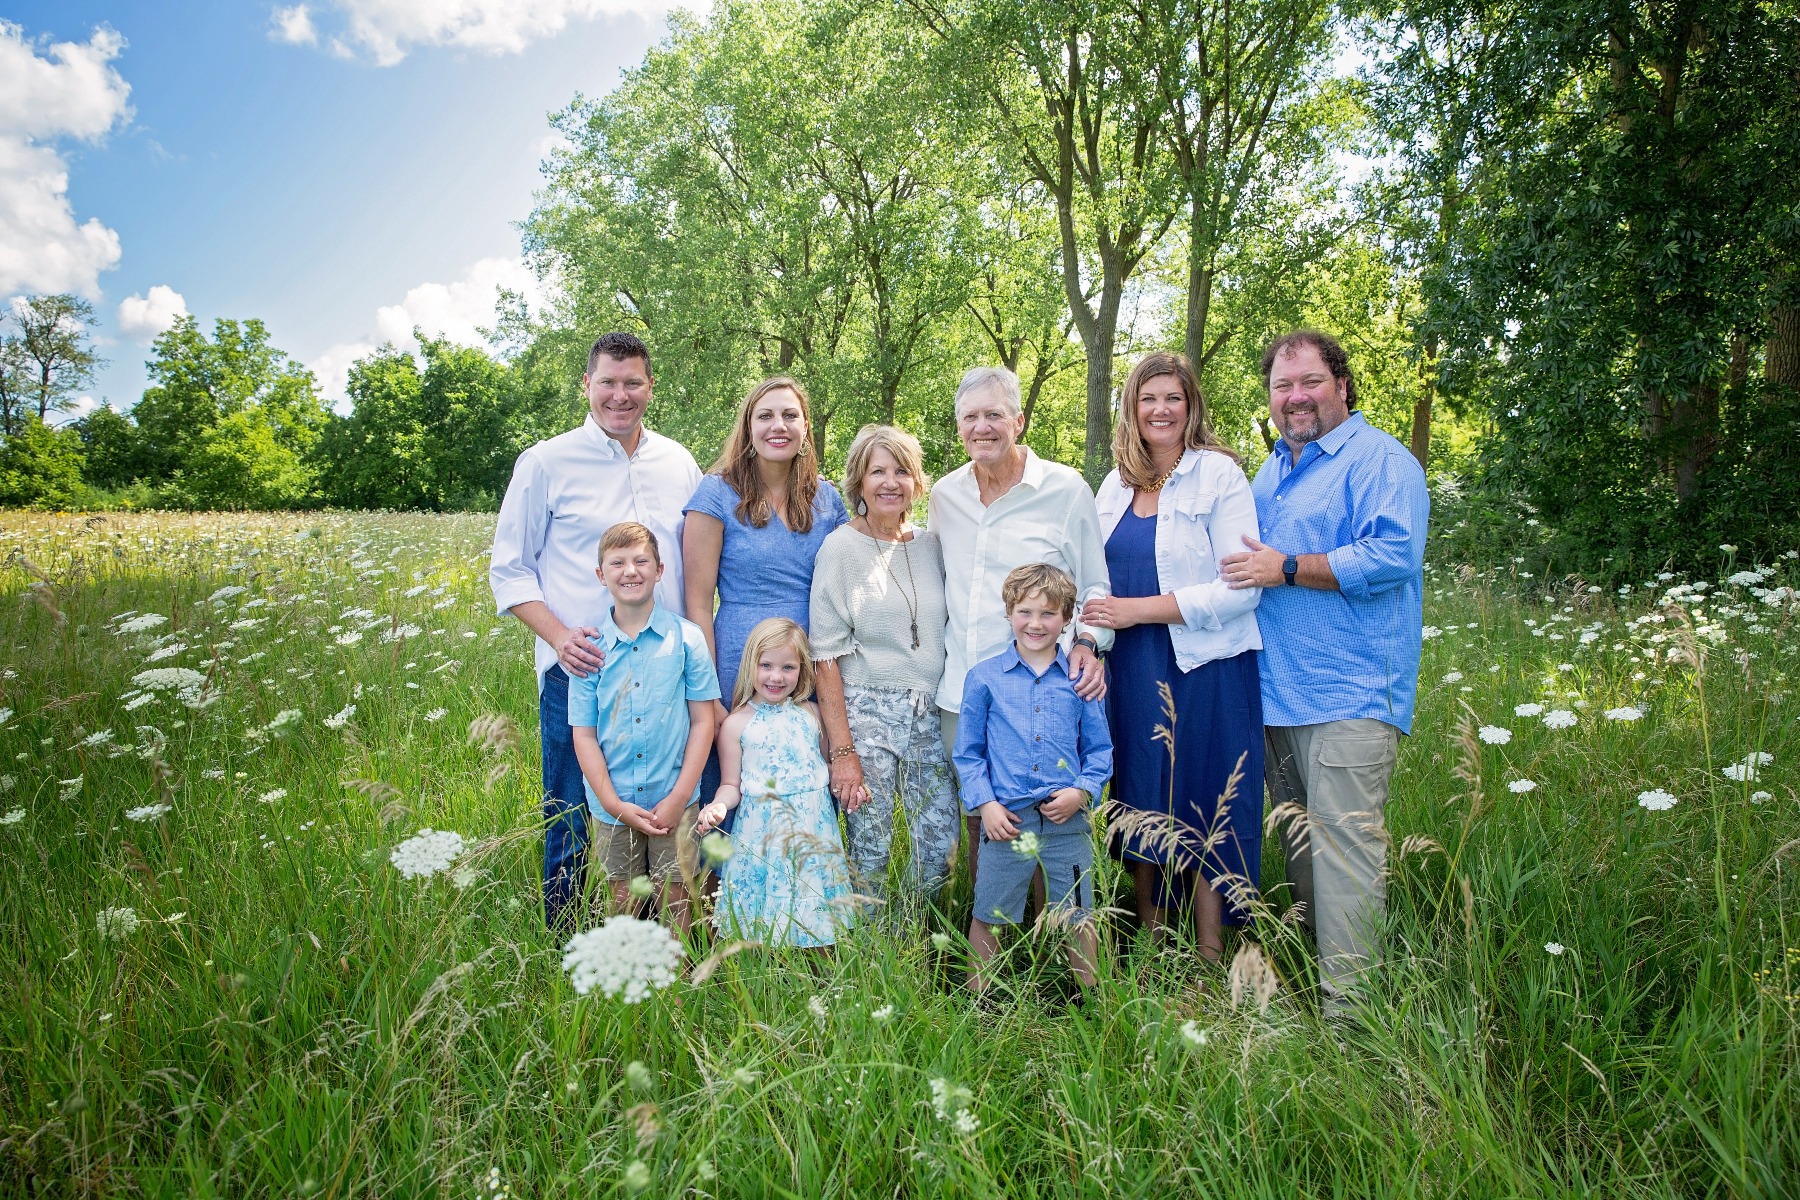 group of 9 families members in shades of blue in a grassy field